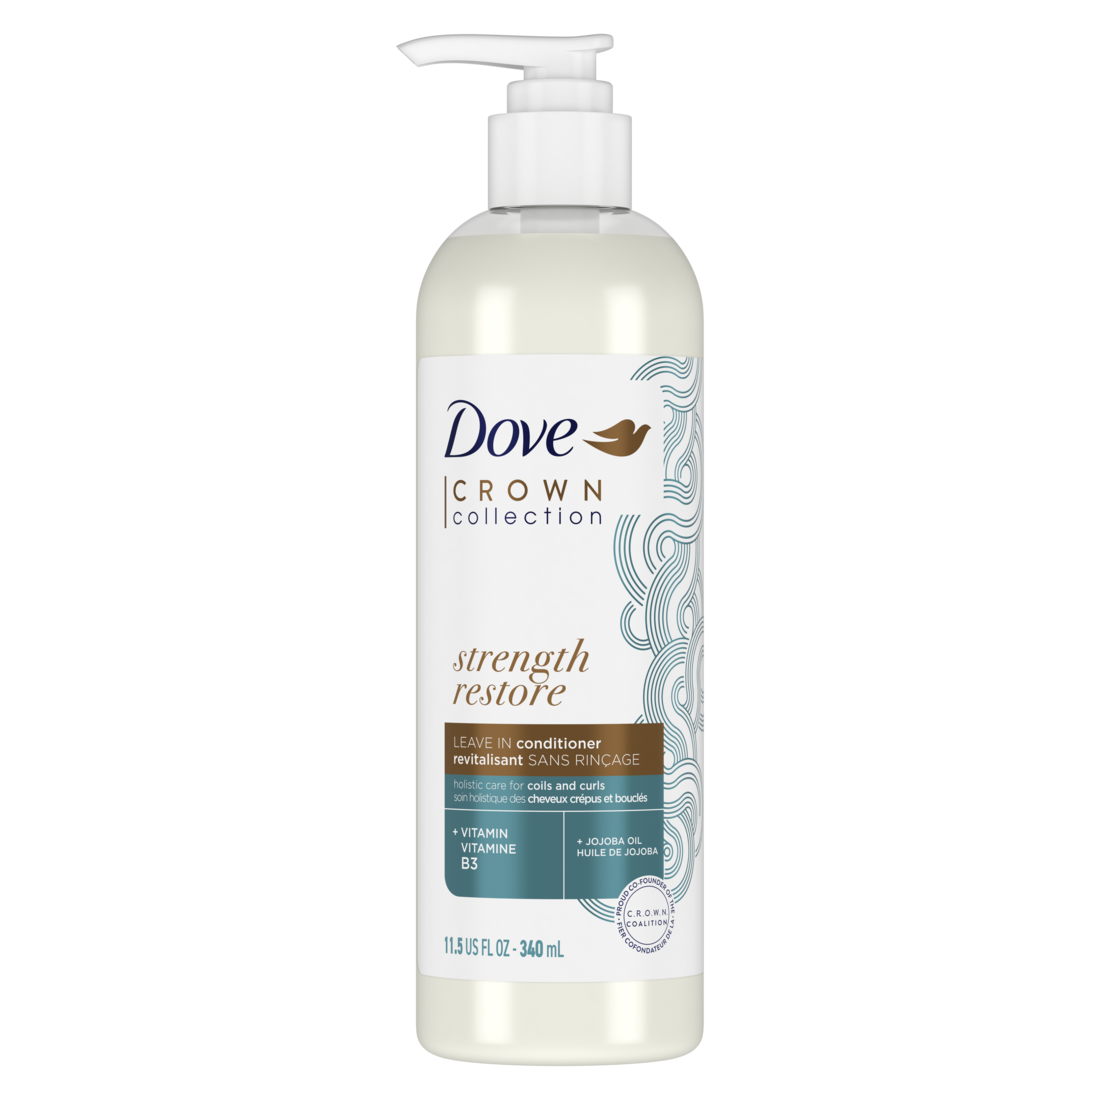 Dove CROWN Collection Strength Restore Leave-In Conditioner 340ml